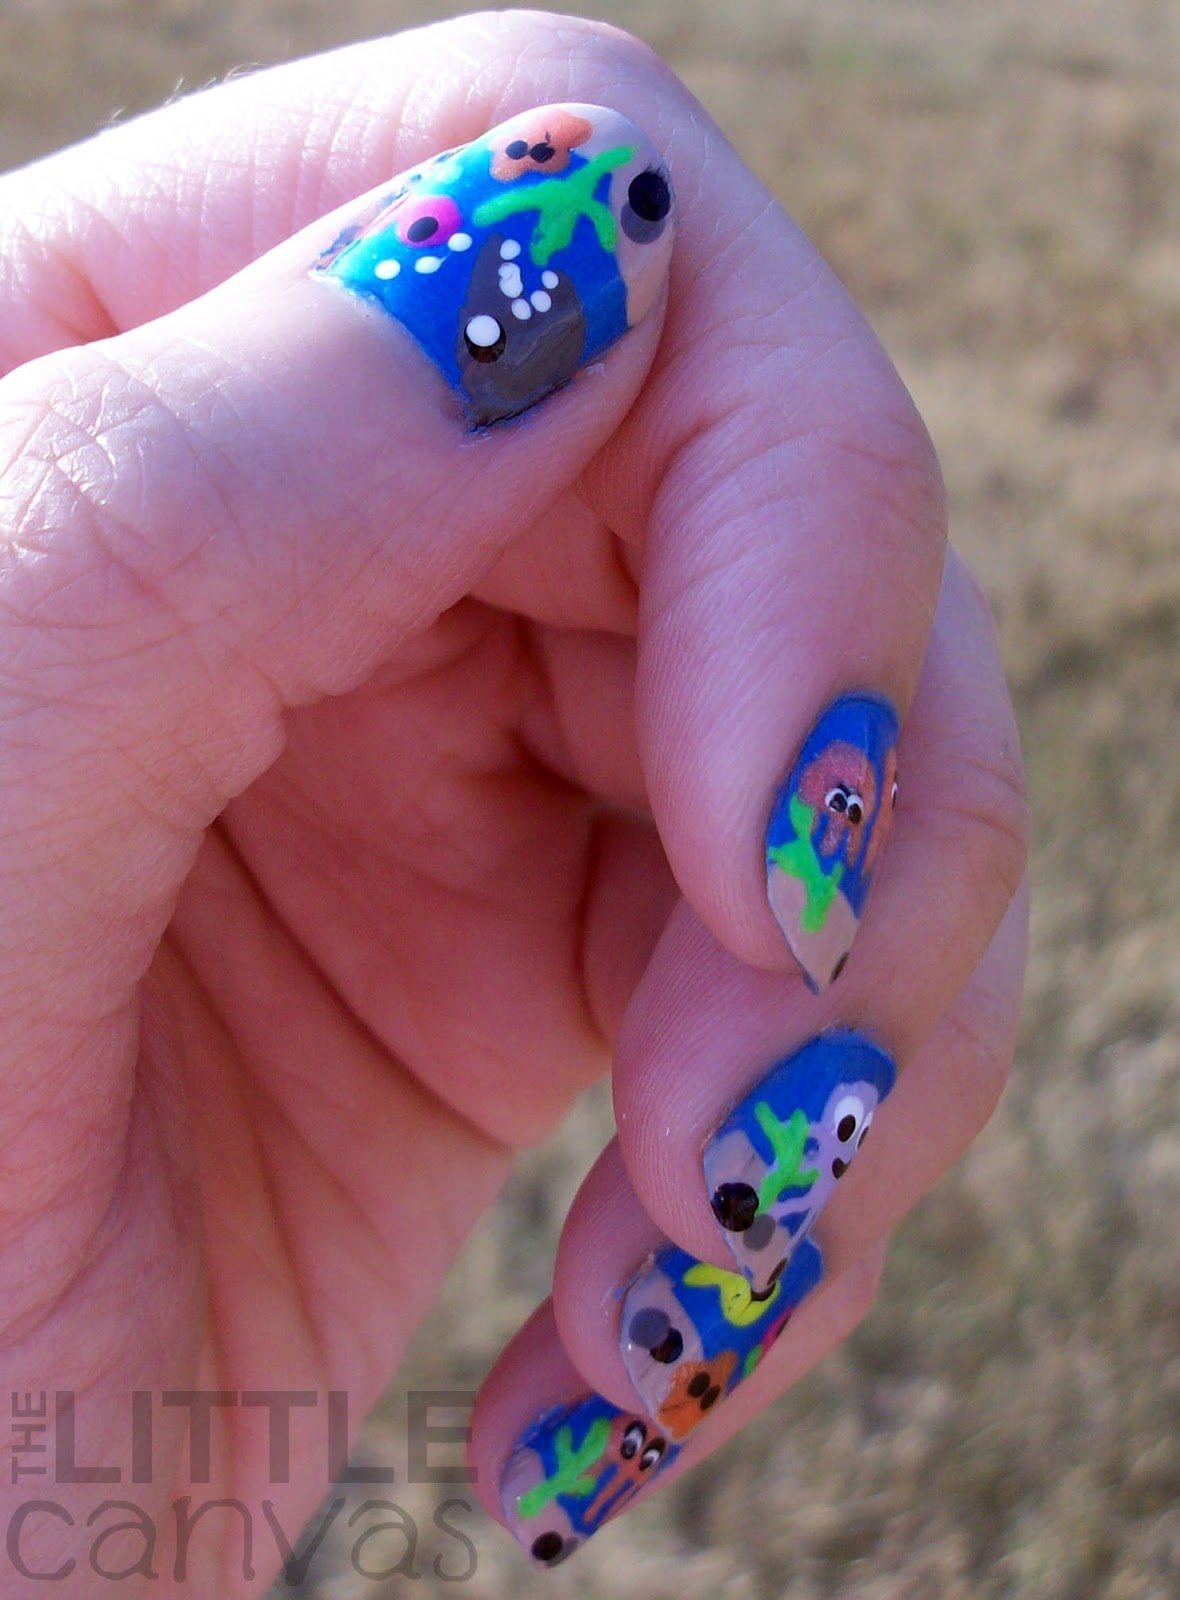 Under The Sea Nail Art The Little Canvas